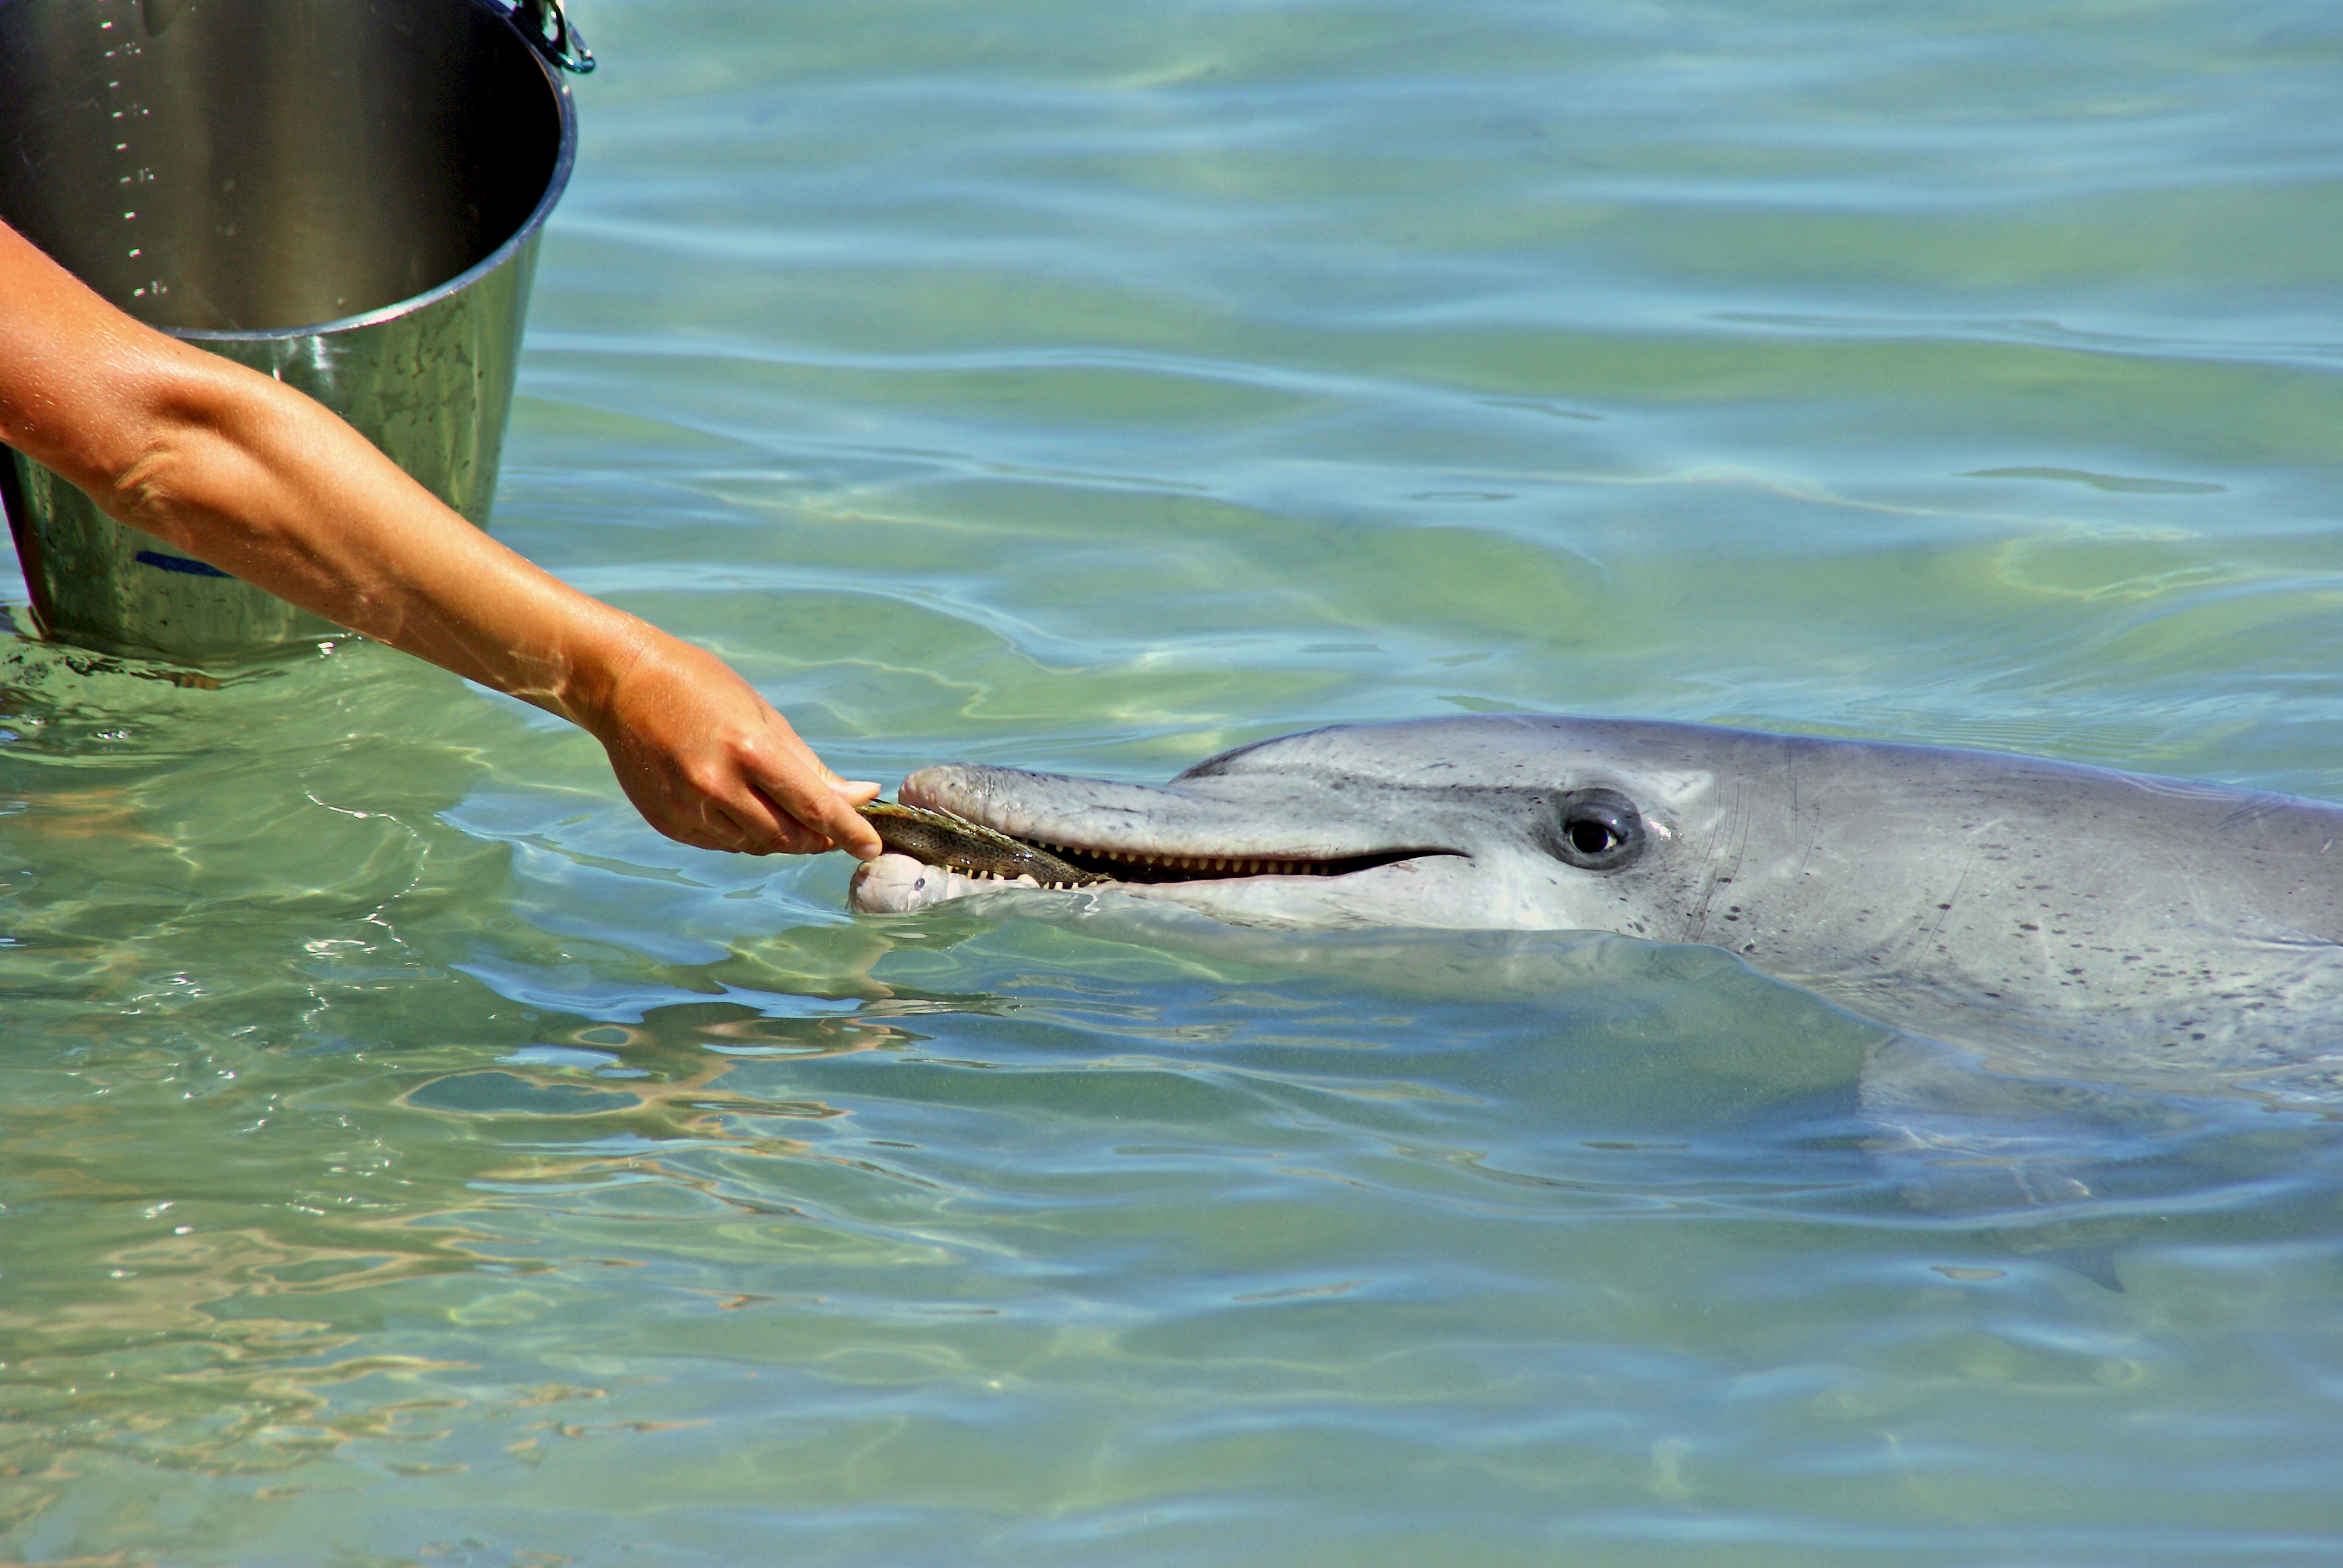 POOR BABY PORPOISE DIES AFTER DRAMATIC RESCUE